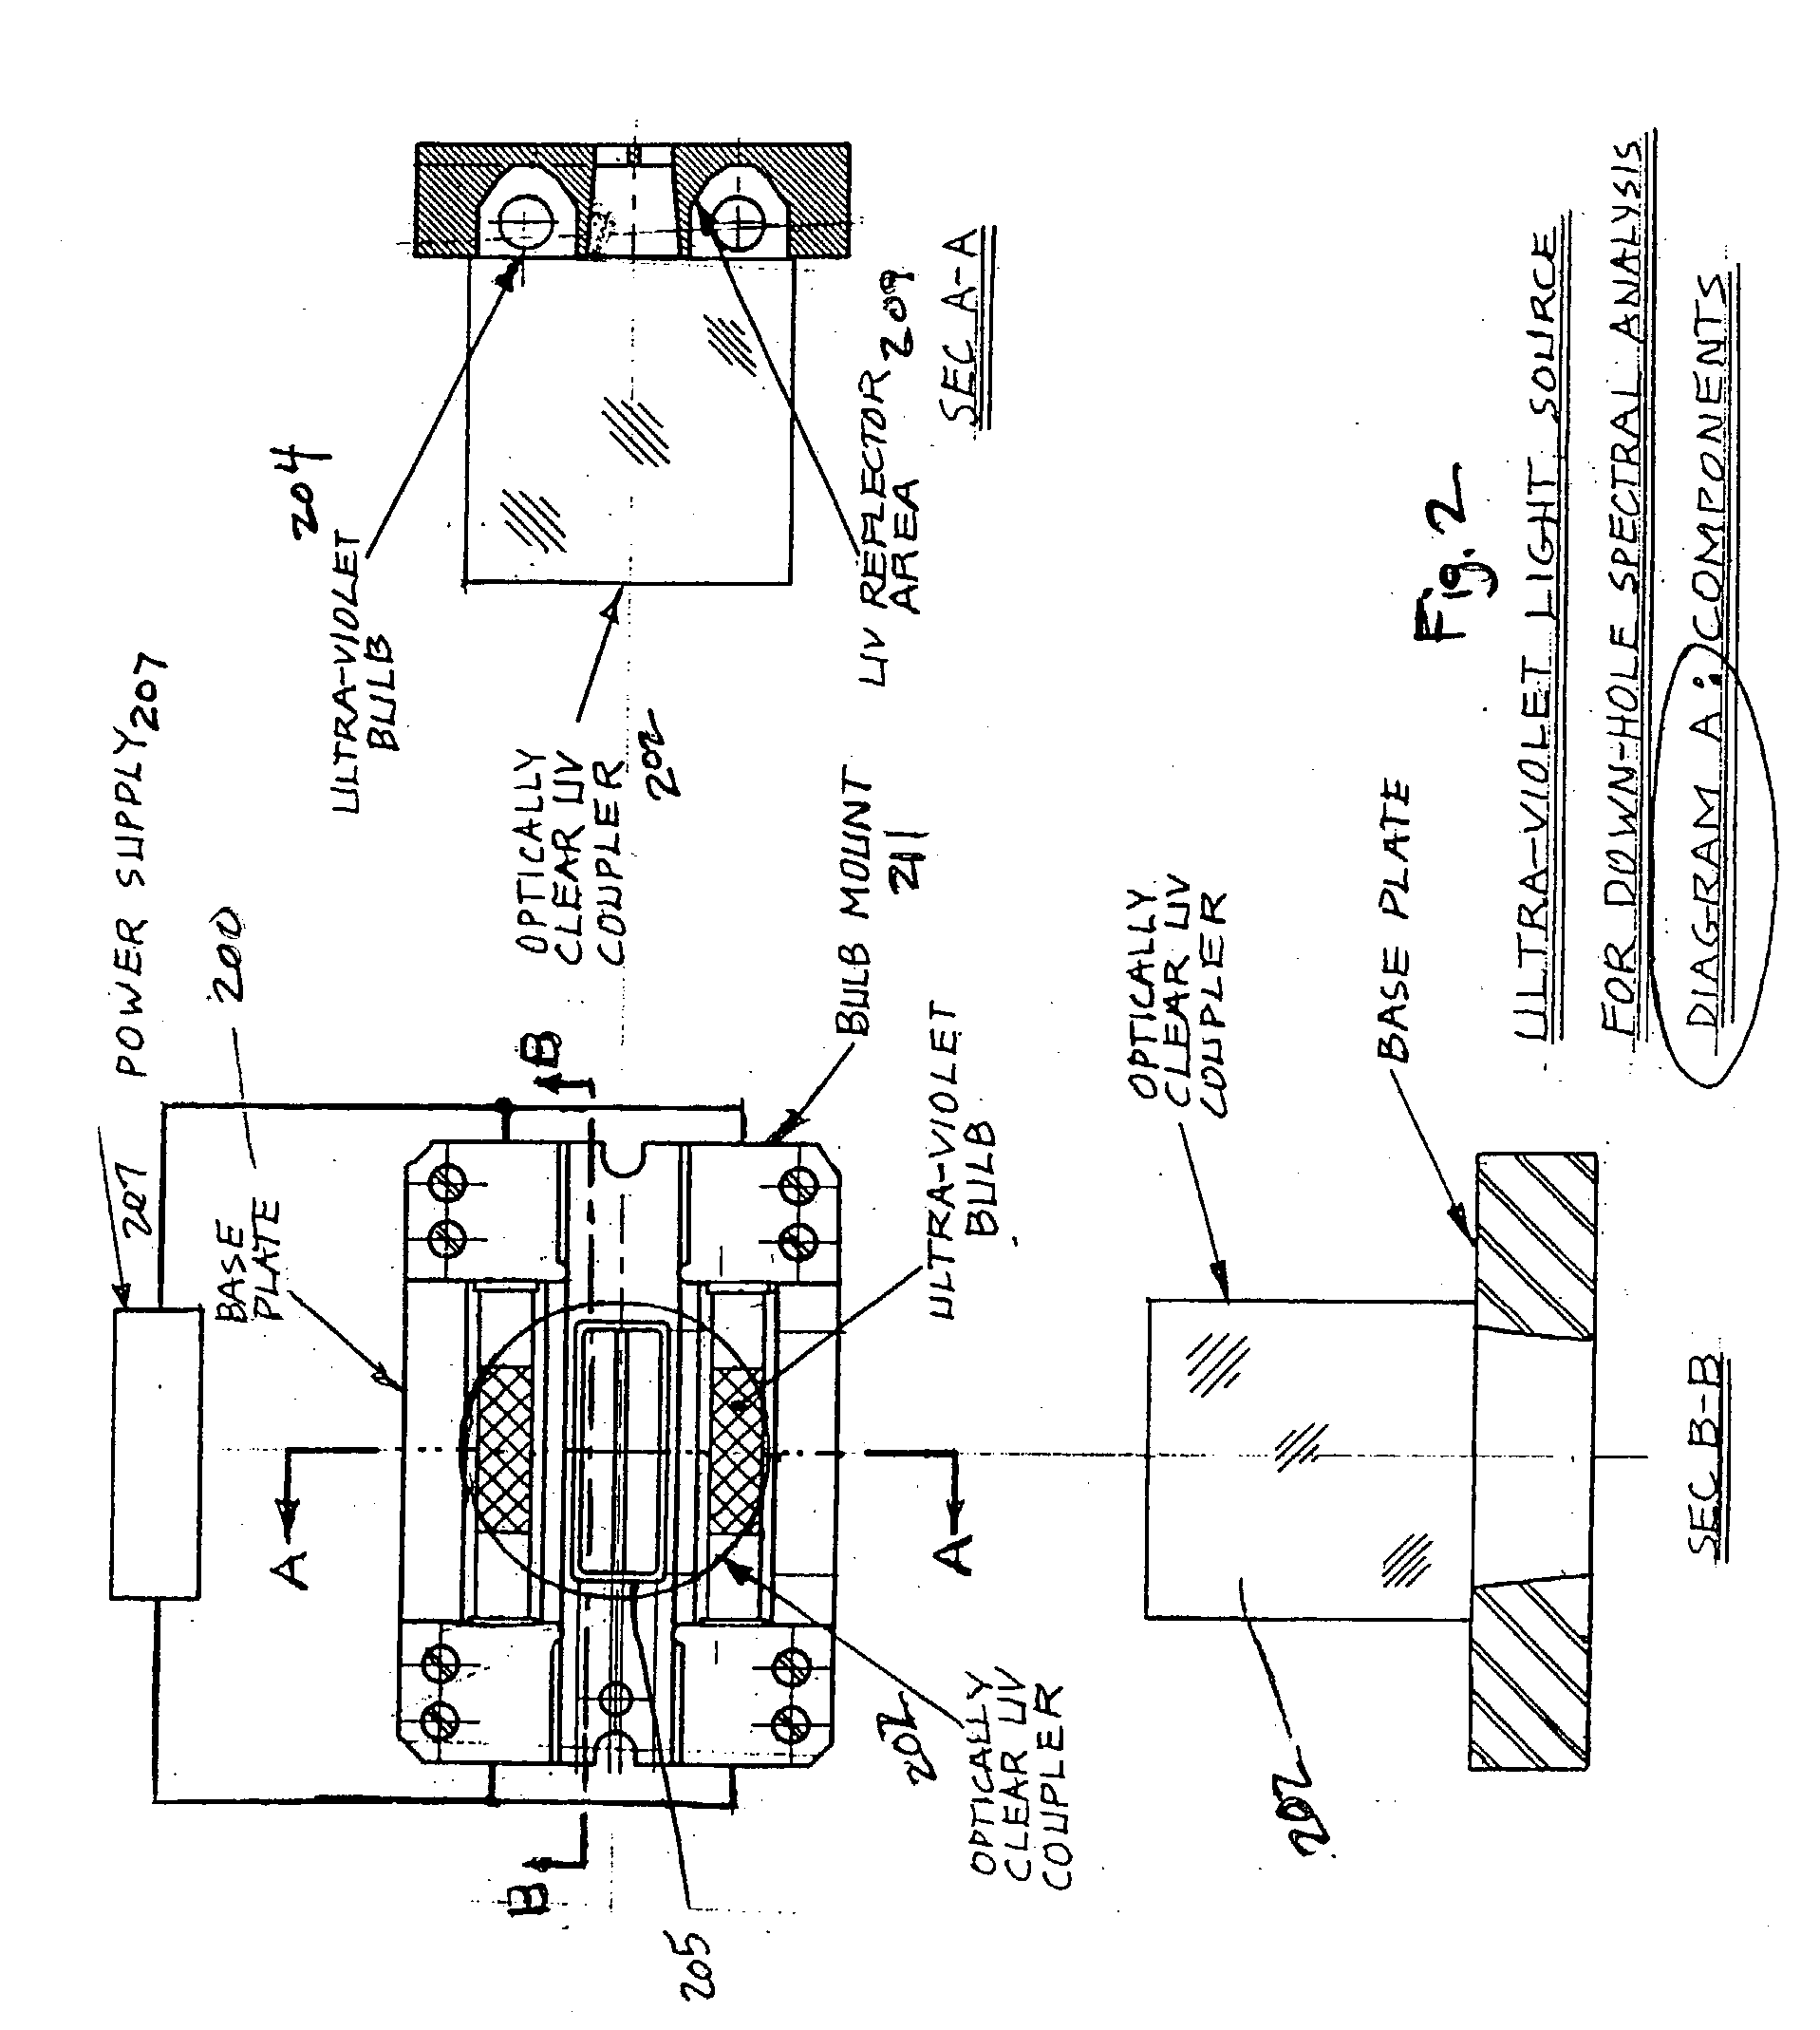 Method and apparatus for a downhole flourescence spectrometer